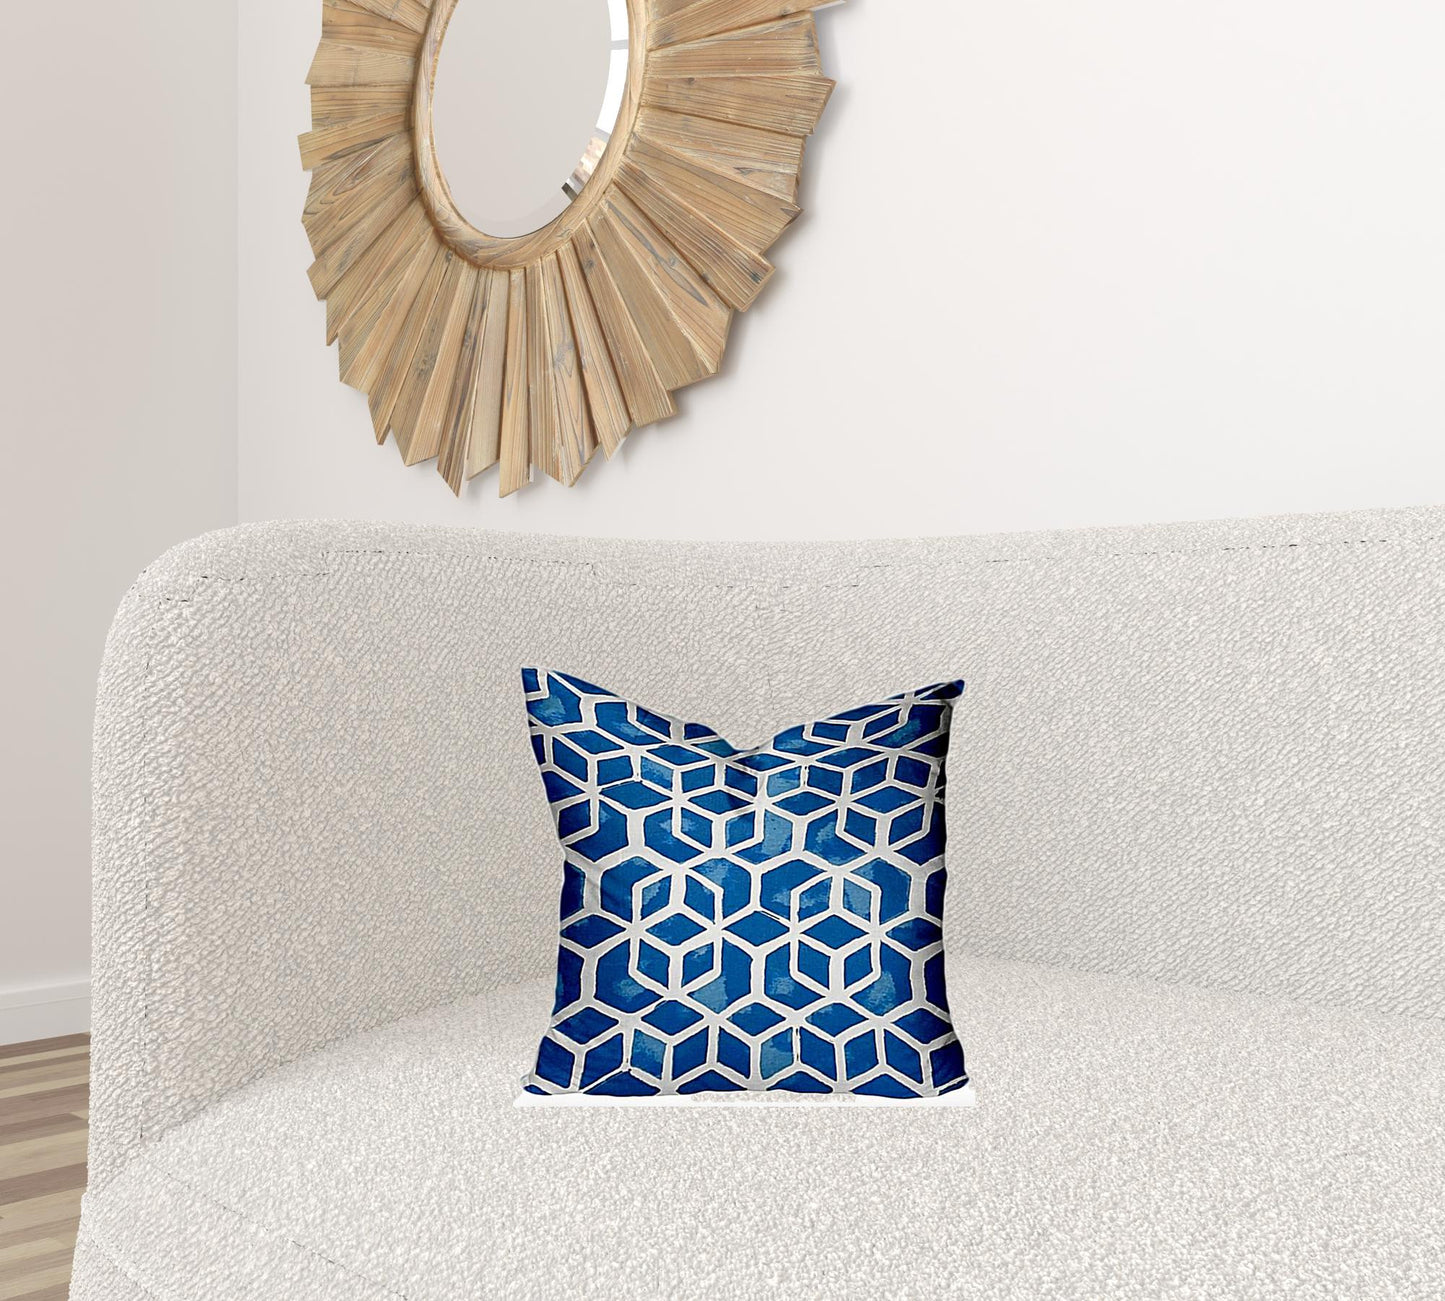 16" X 16" Blue And White Enveloped Geometric Throw Indoor Outdoor Pillow